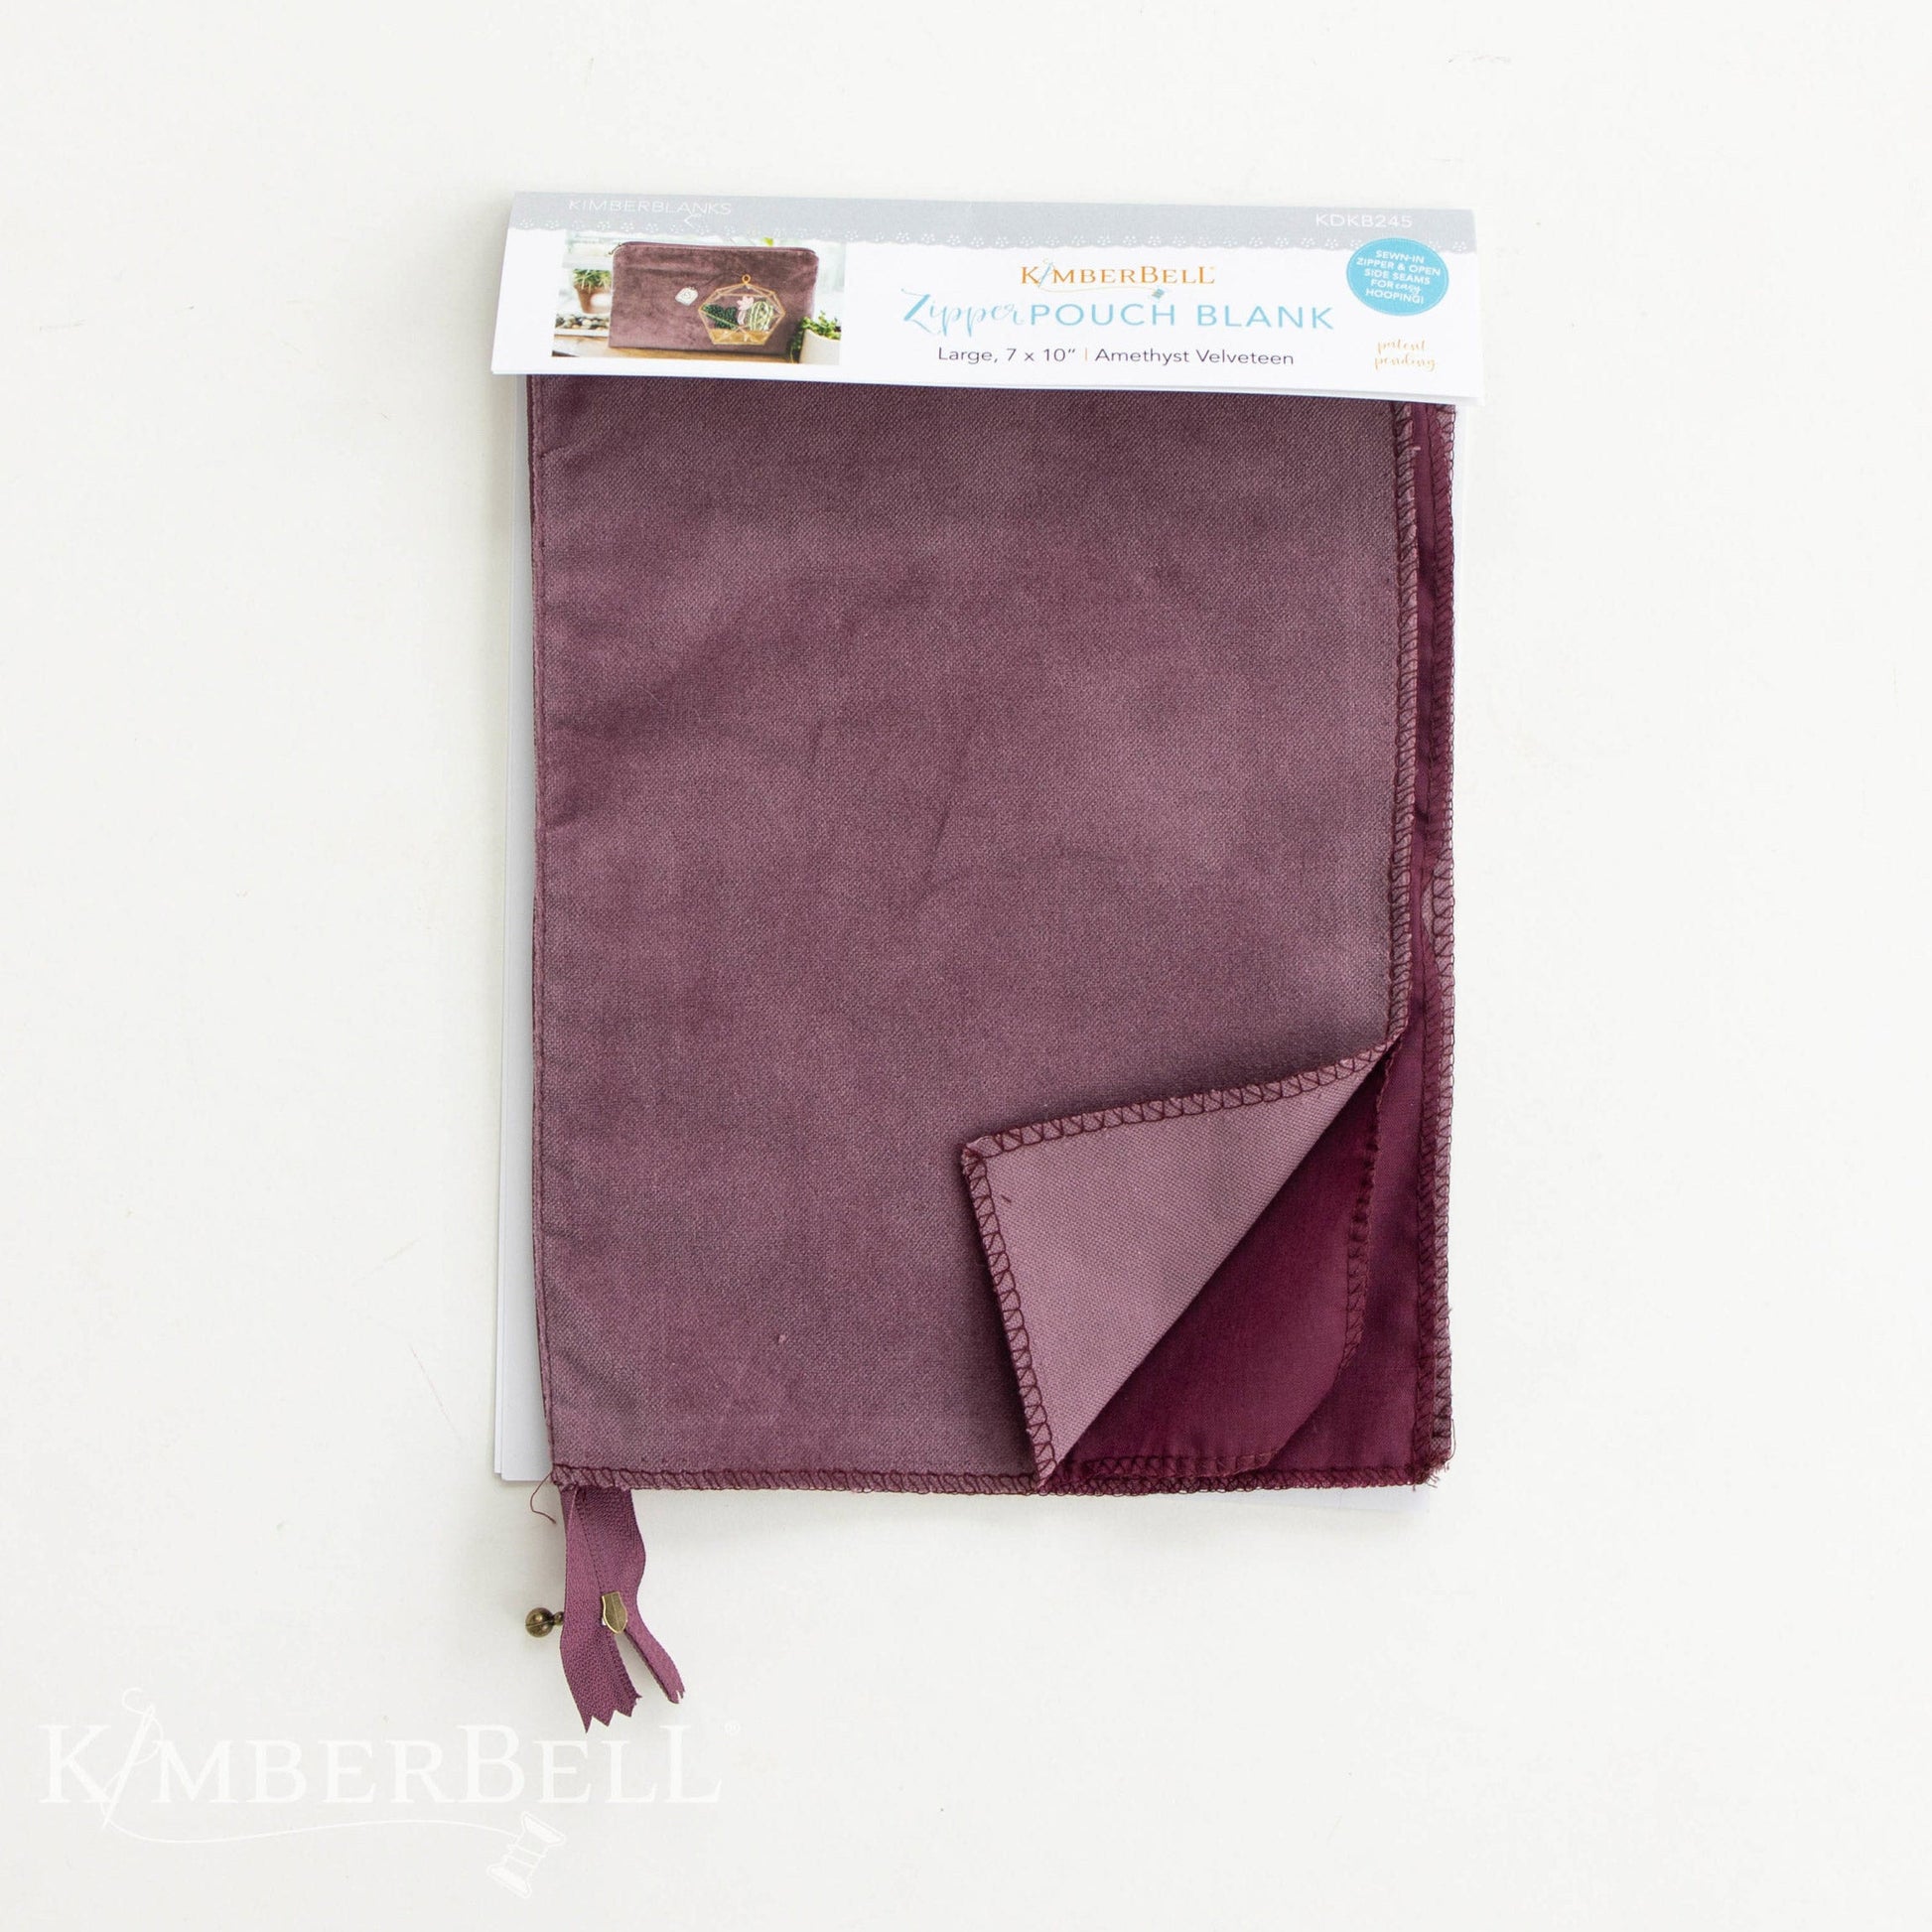 Zipper Pouch Blanks in Amethyst (KDKB245) by Kimberbell have all the beauty and fun of a hand-made pouch, without all of the fuss. The patent pending design features an open side seam to make adding your favorite design easier than ever.  Amethyst is only available in the large (7x10”) size.